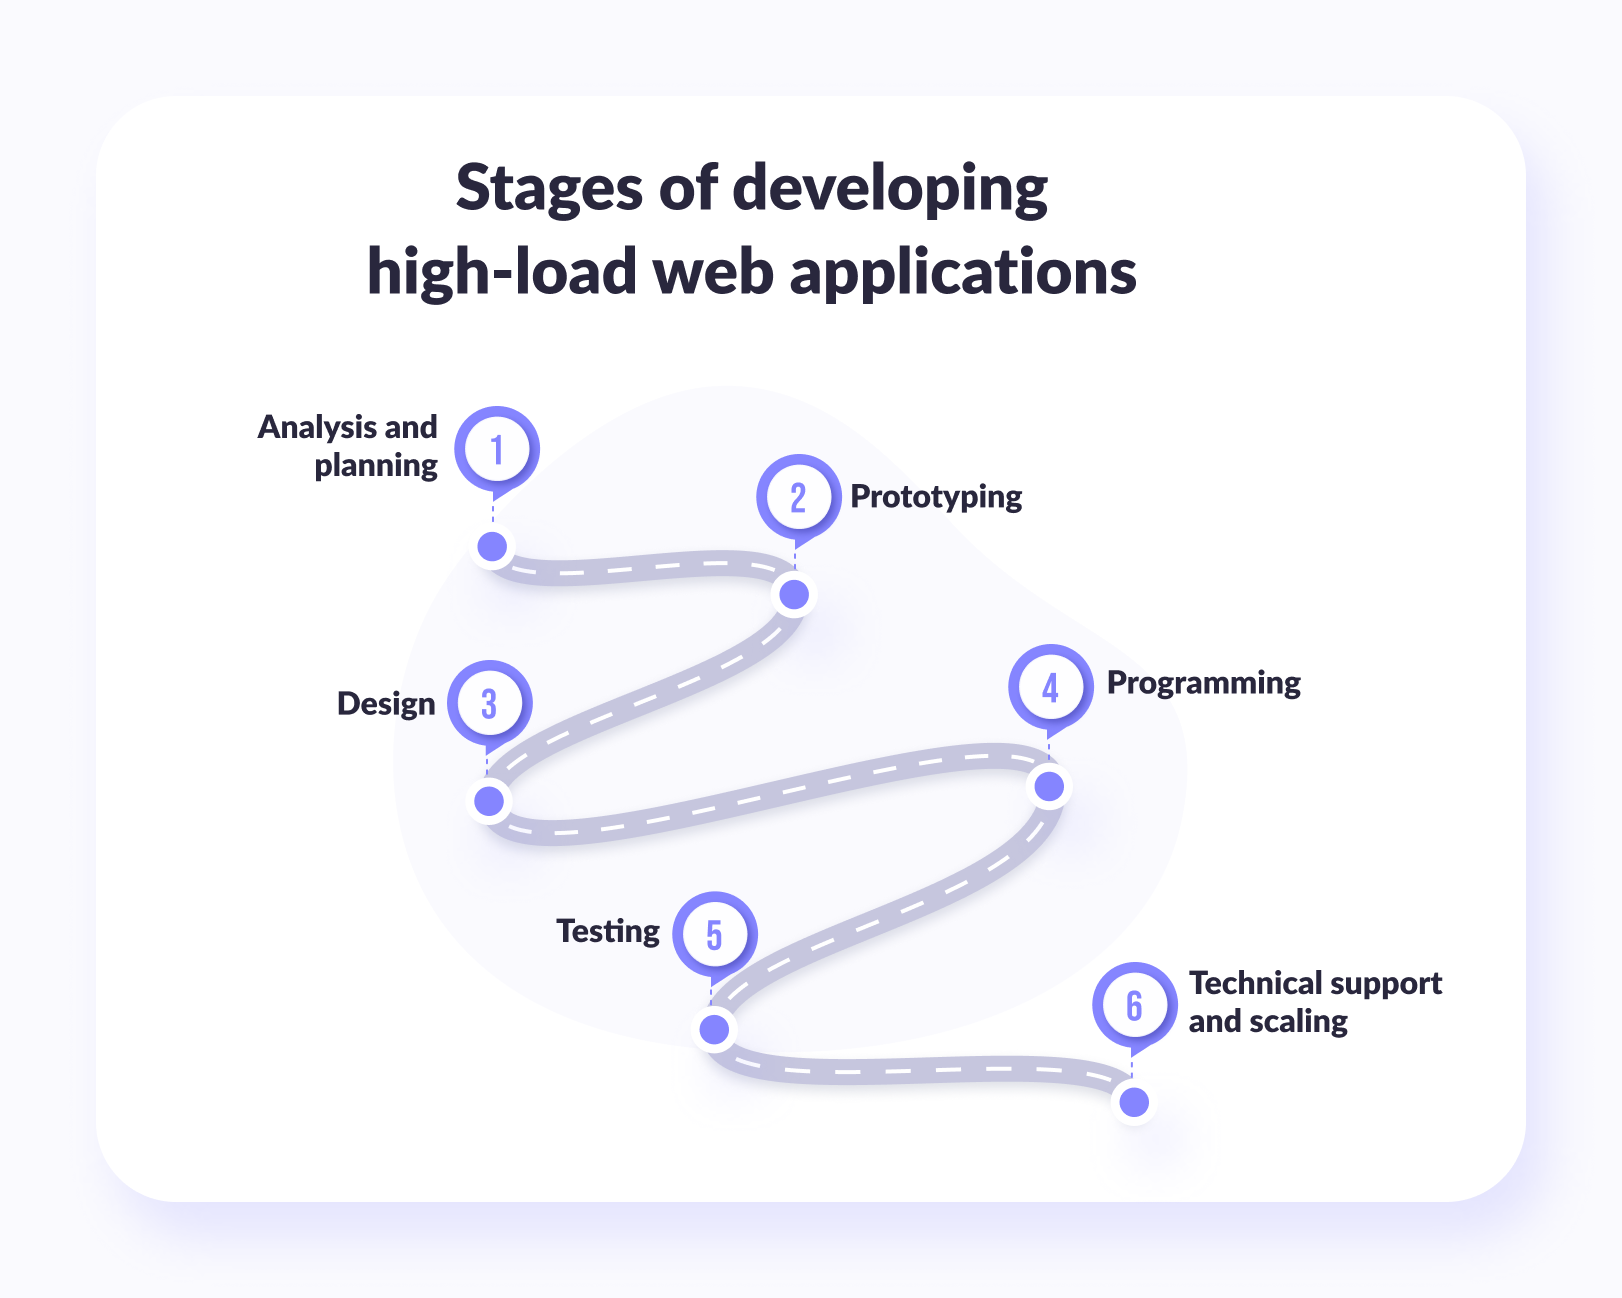 Stages of developing high-load web applications